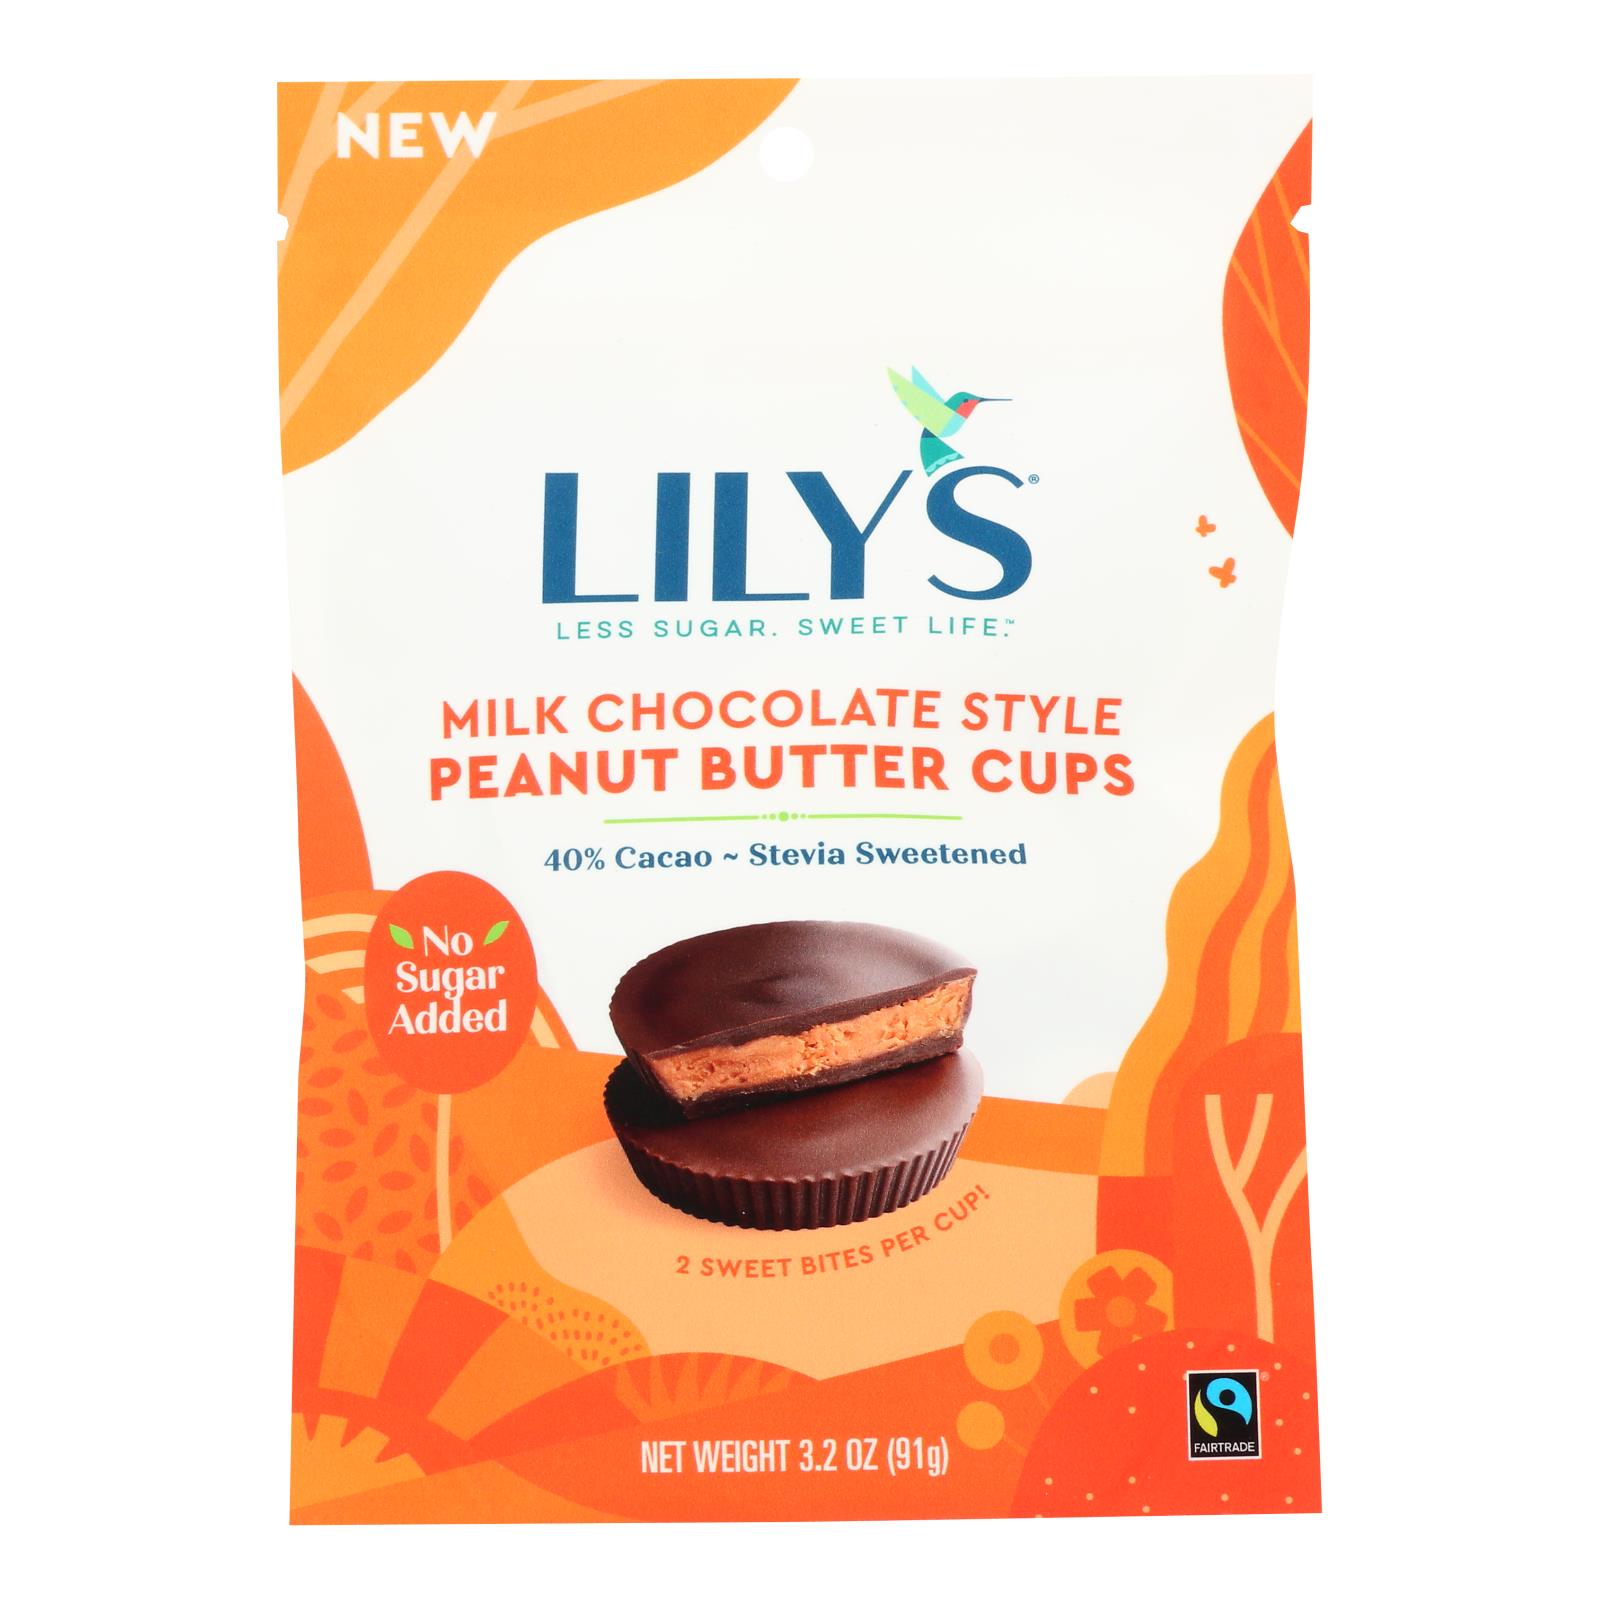 Lily's Sweets - Peanut Butter Cup Milk Chocolate - 12개 묶음상품 - 3.2 OZ